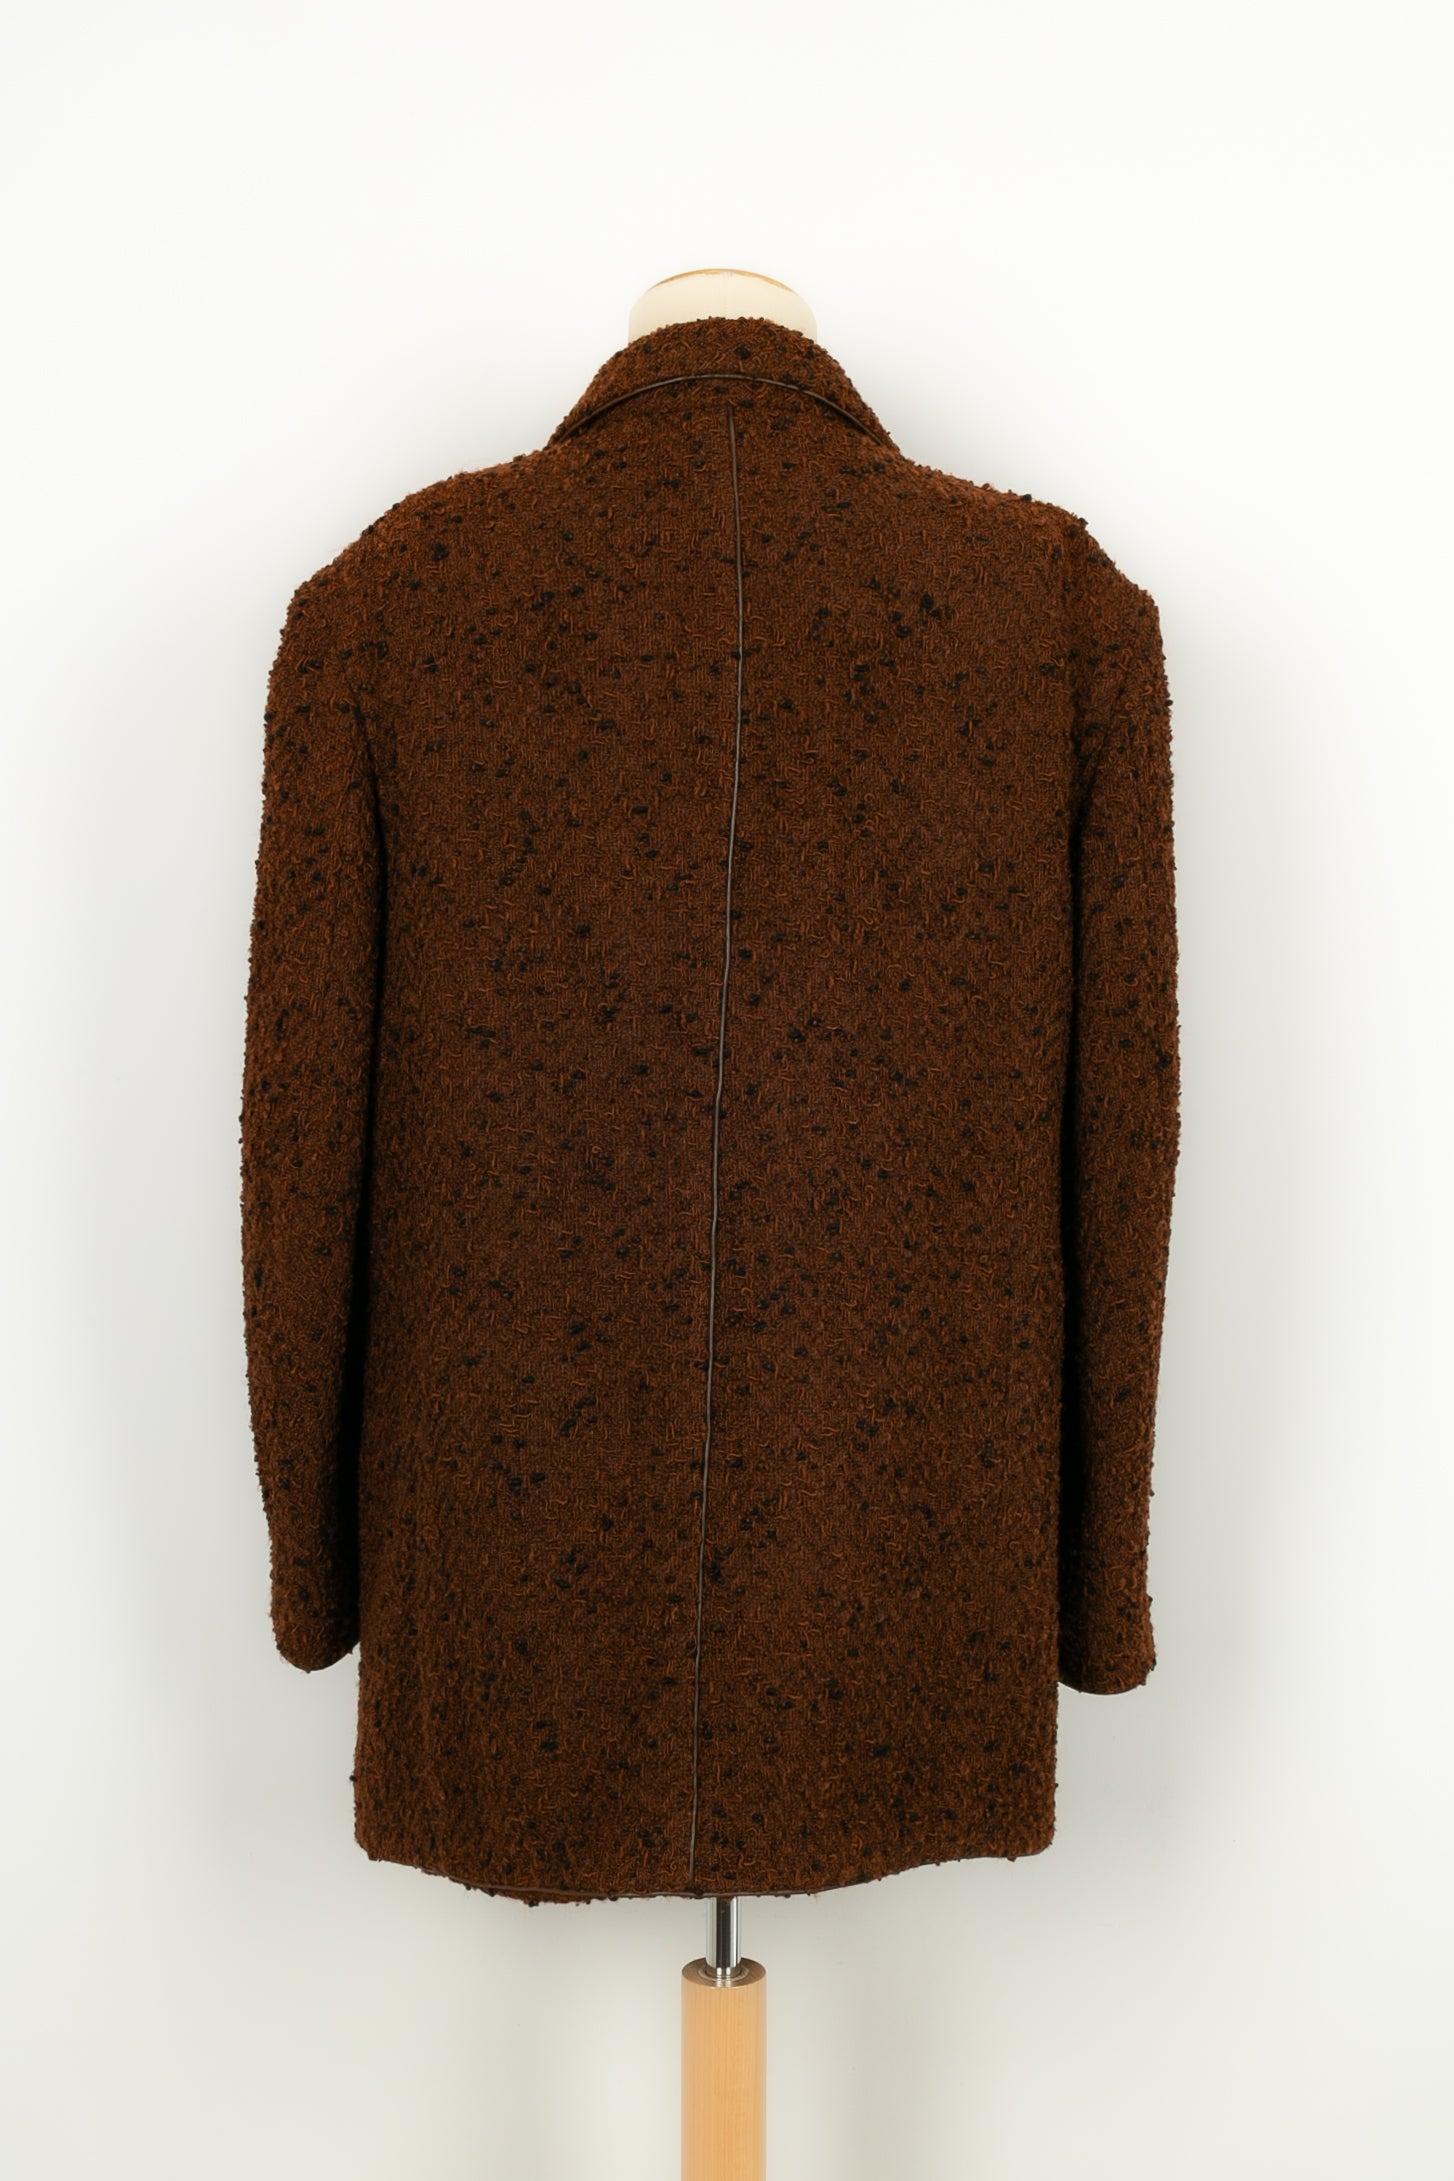 Chanel Jacket in Brown-Wool Tweed with Silk Lining, 1997 In Excellent Condition For Sale In SAINT-OUEN-SUR-SEINE, FR